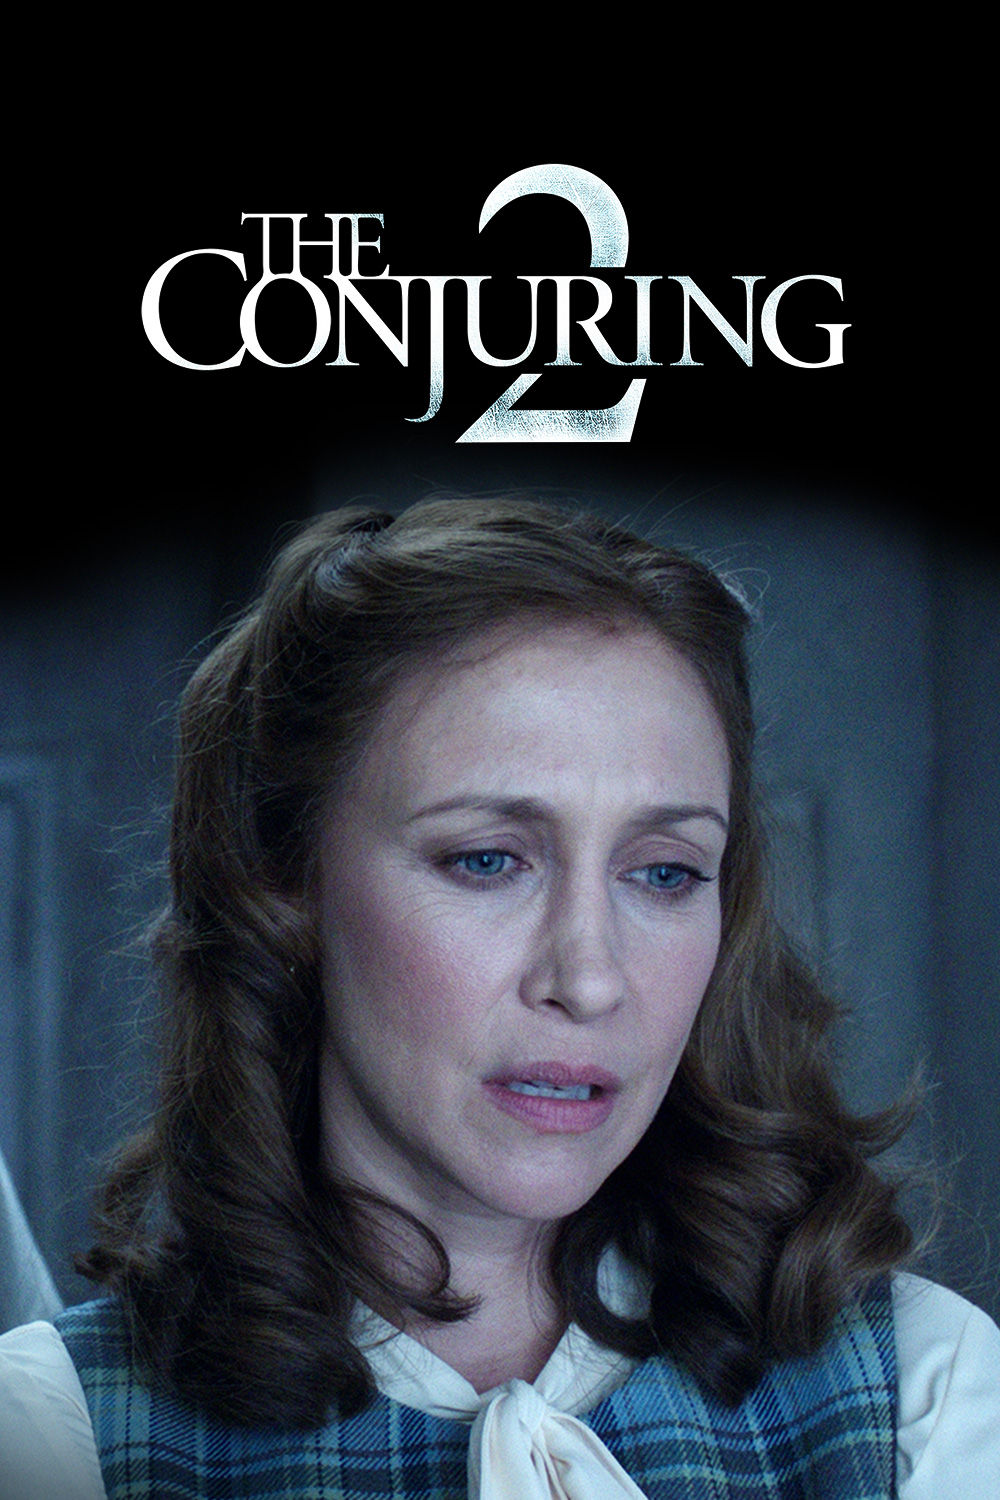 Watch The Conjuring 2 Online